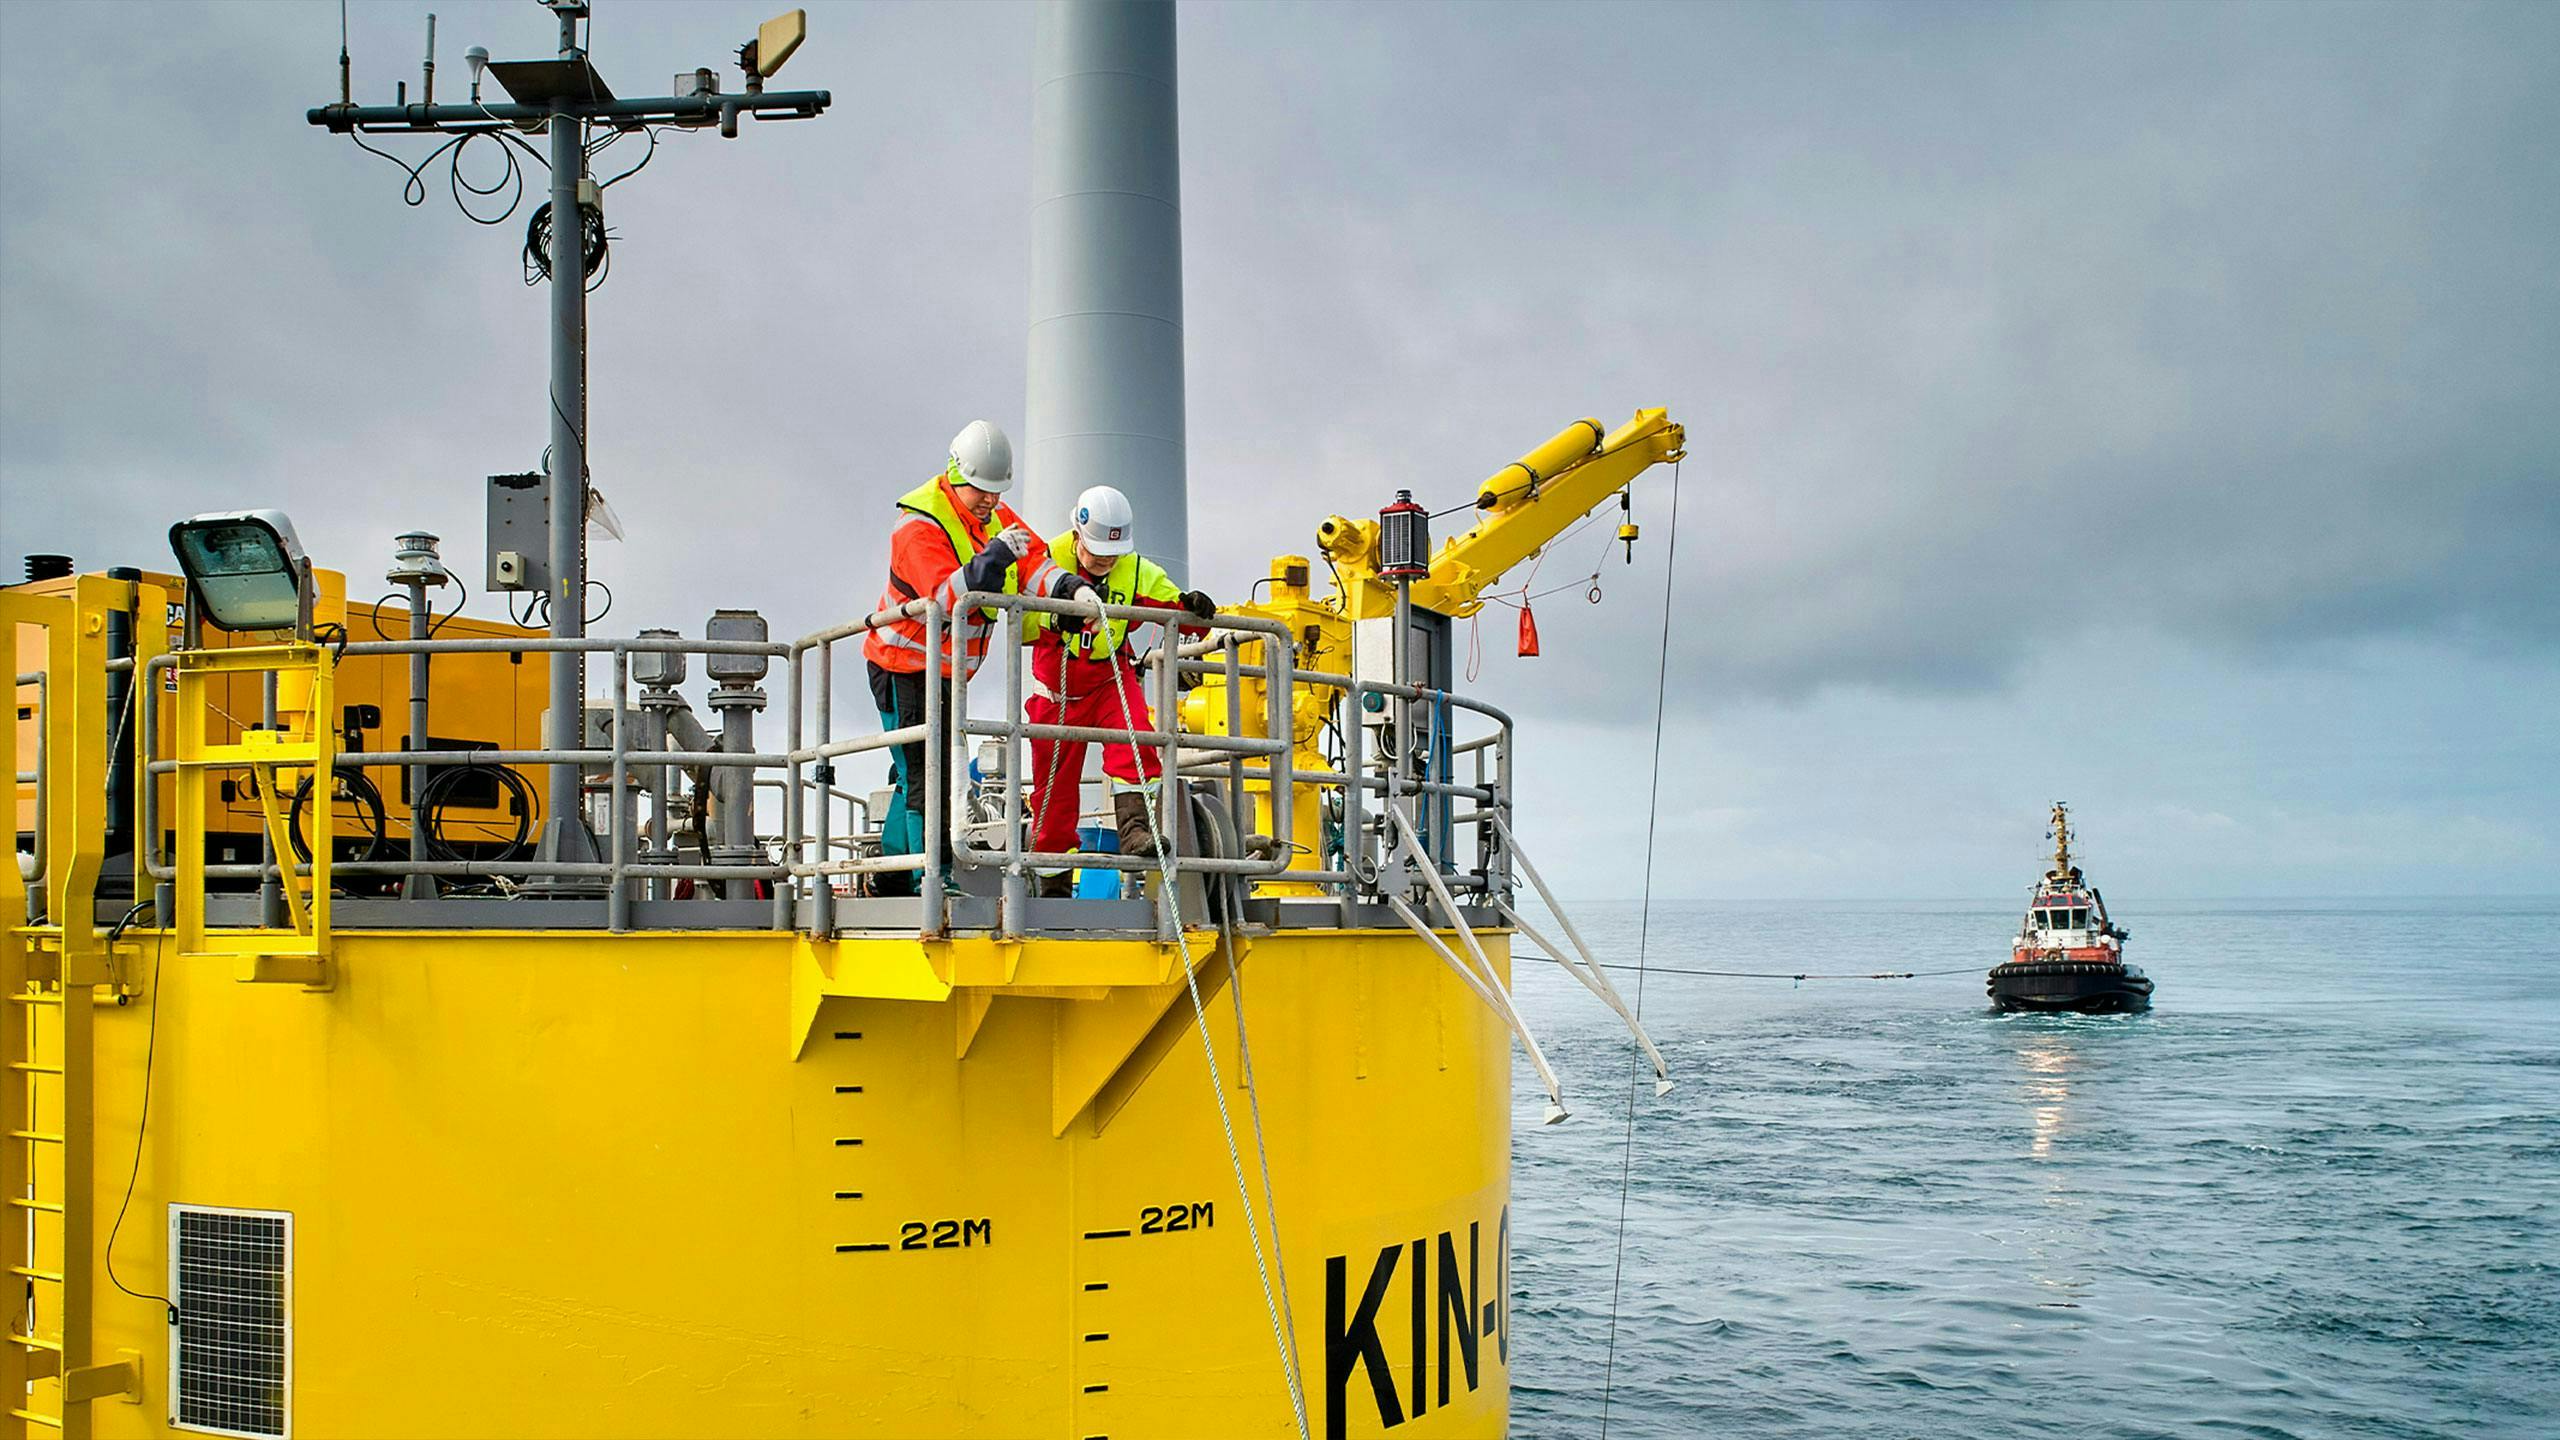 Still the largest floating wind farm in the world, the Kincardine Offshore Wind Farm is sited 15 km off the coast of Aberdeen.